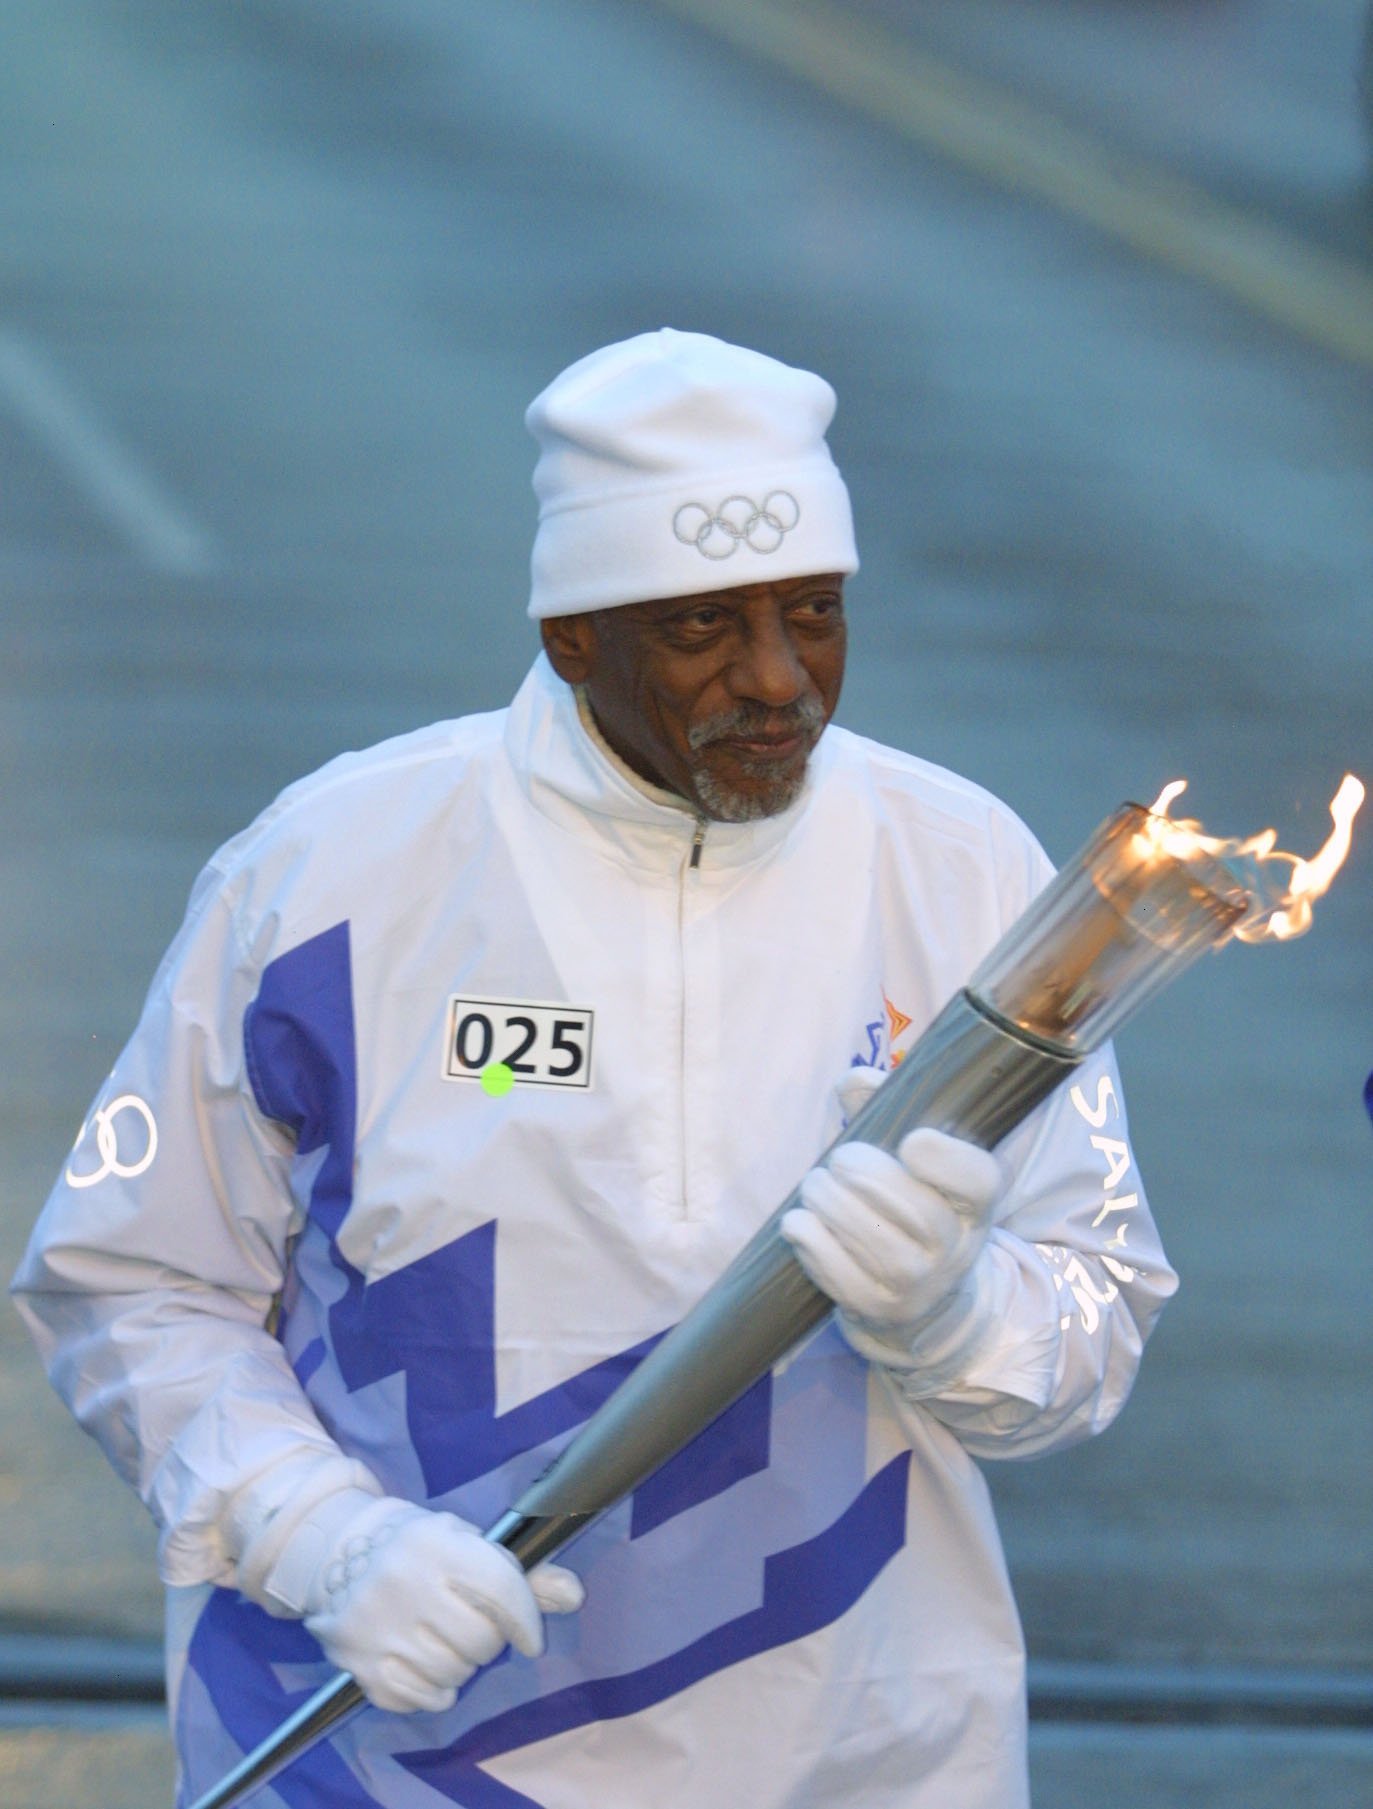 Harrison Dillard, an Olympic hurdler in the 1948 and 1952 Olympics, carries the Olympic Flame during the 2002 Salt Lake Olympic Torch Relay in Cleveland, Ohio | Photo: Getty Images